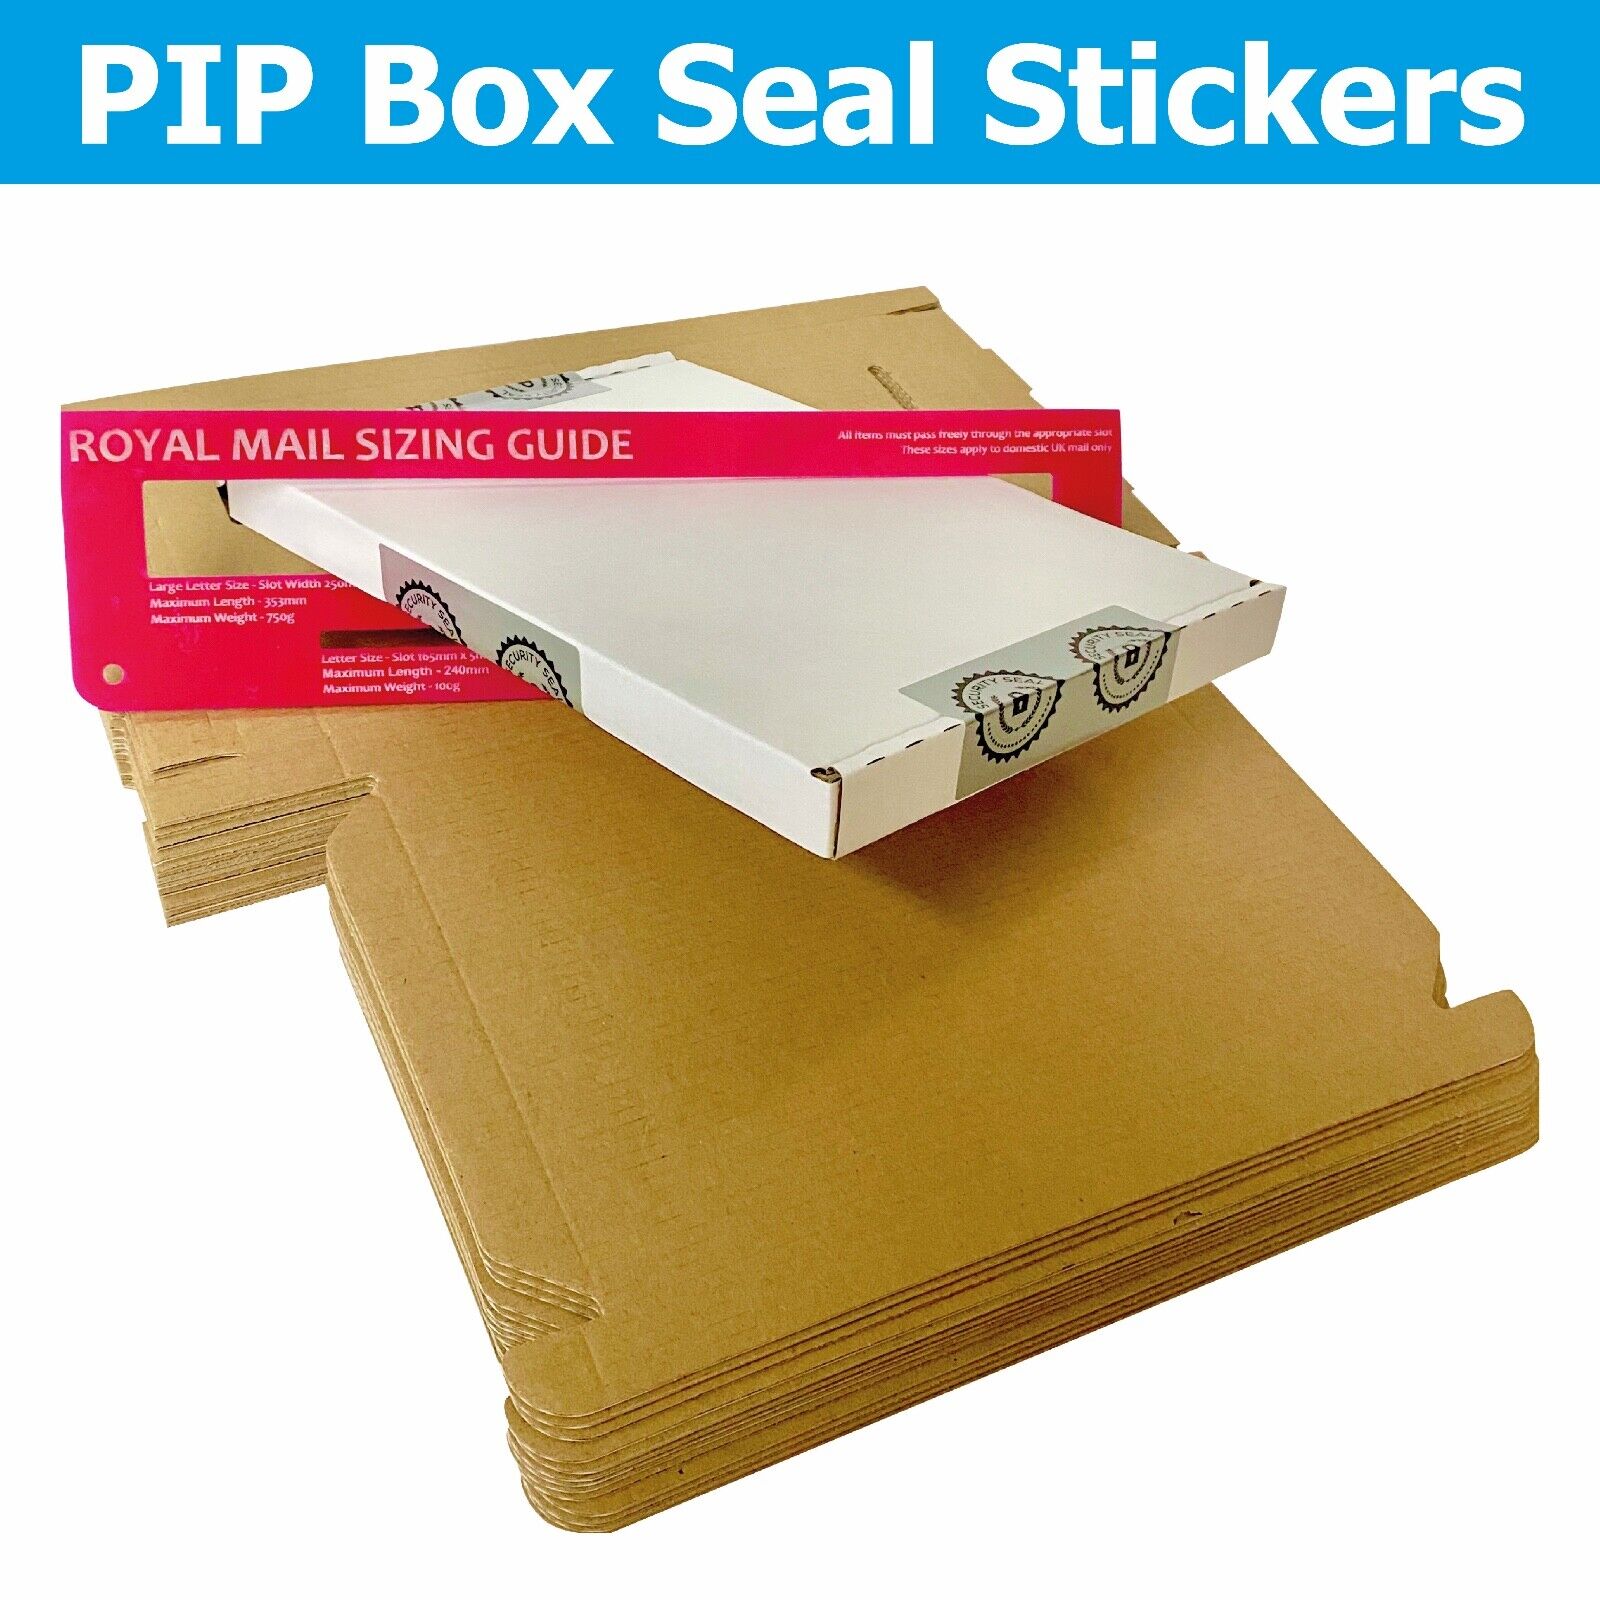 PIP Box / Packet / BOX Security Seals Ideal For all kinds of packaging 5 razy więcej punktów